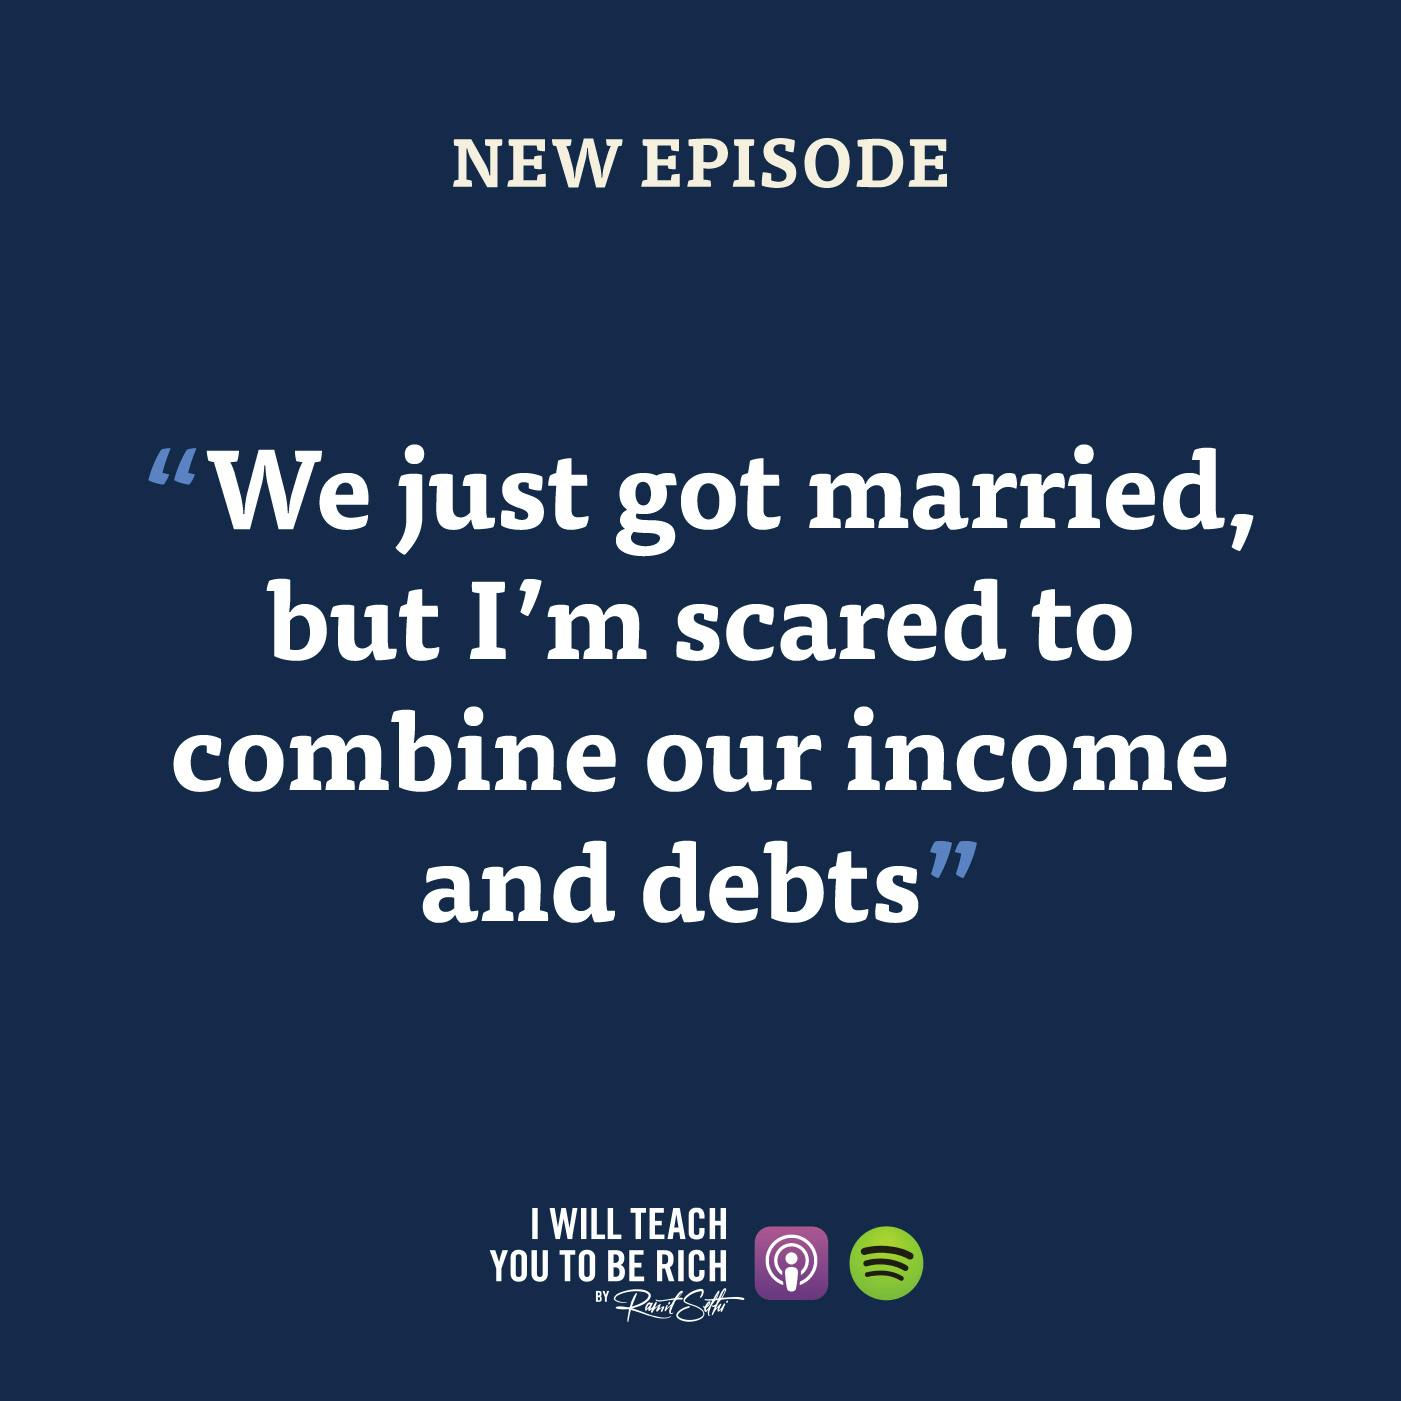 32. “We just got married, but I’m scared to combine our income and debts”